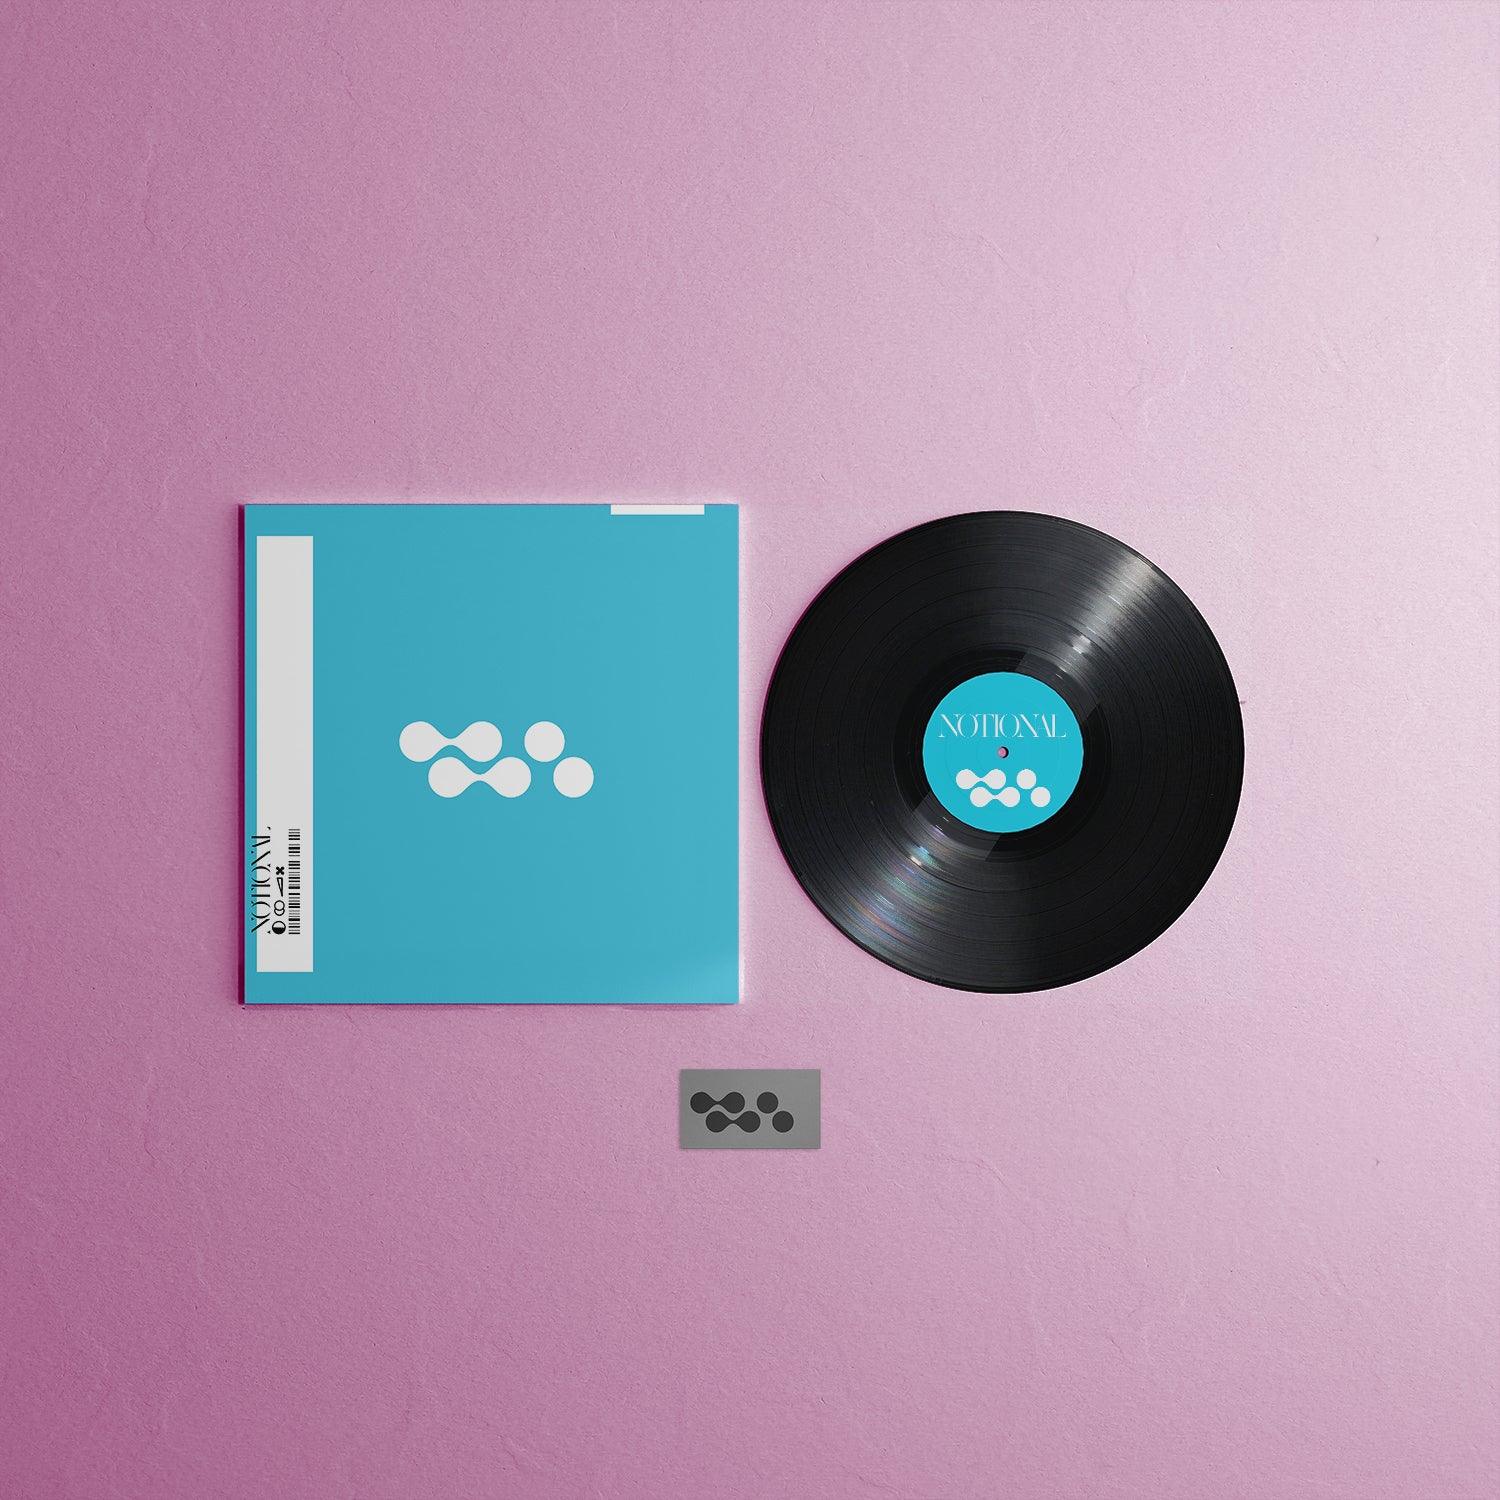 Customizable Mockup Featuring Disc, Sleeve & Download Card. Professional 12" Vinyl Album Cover Design Made Easy! 